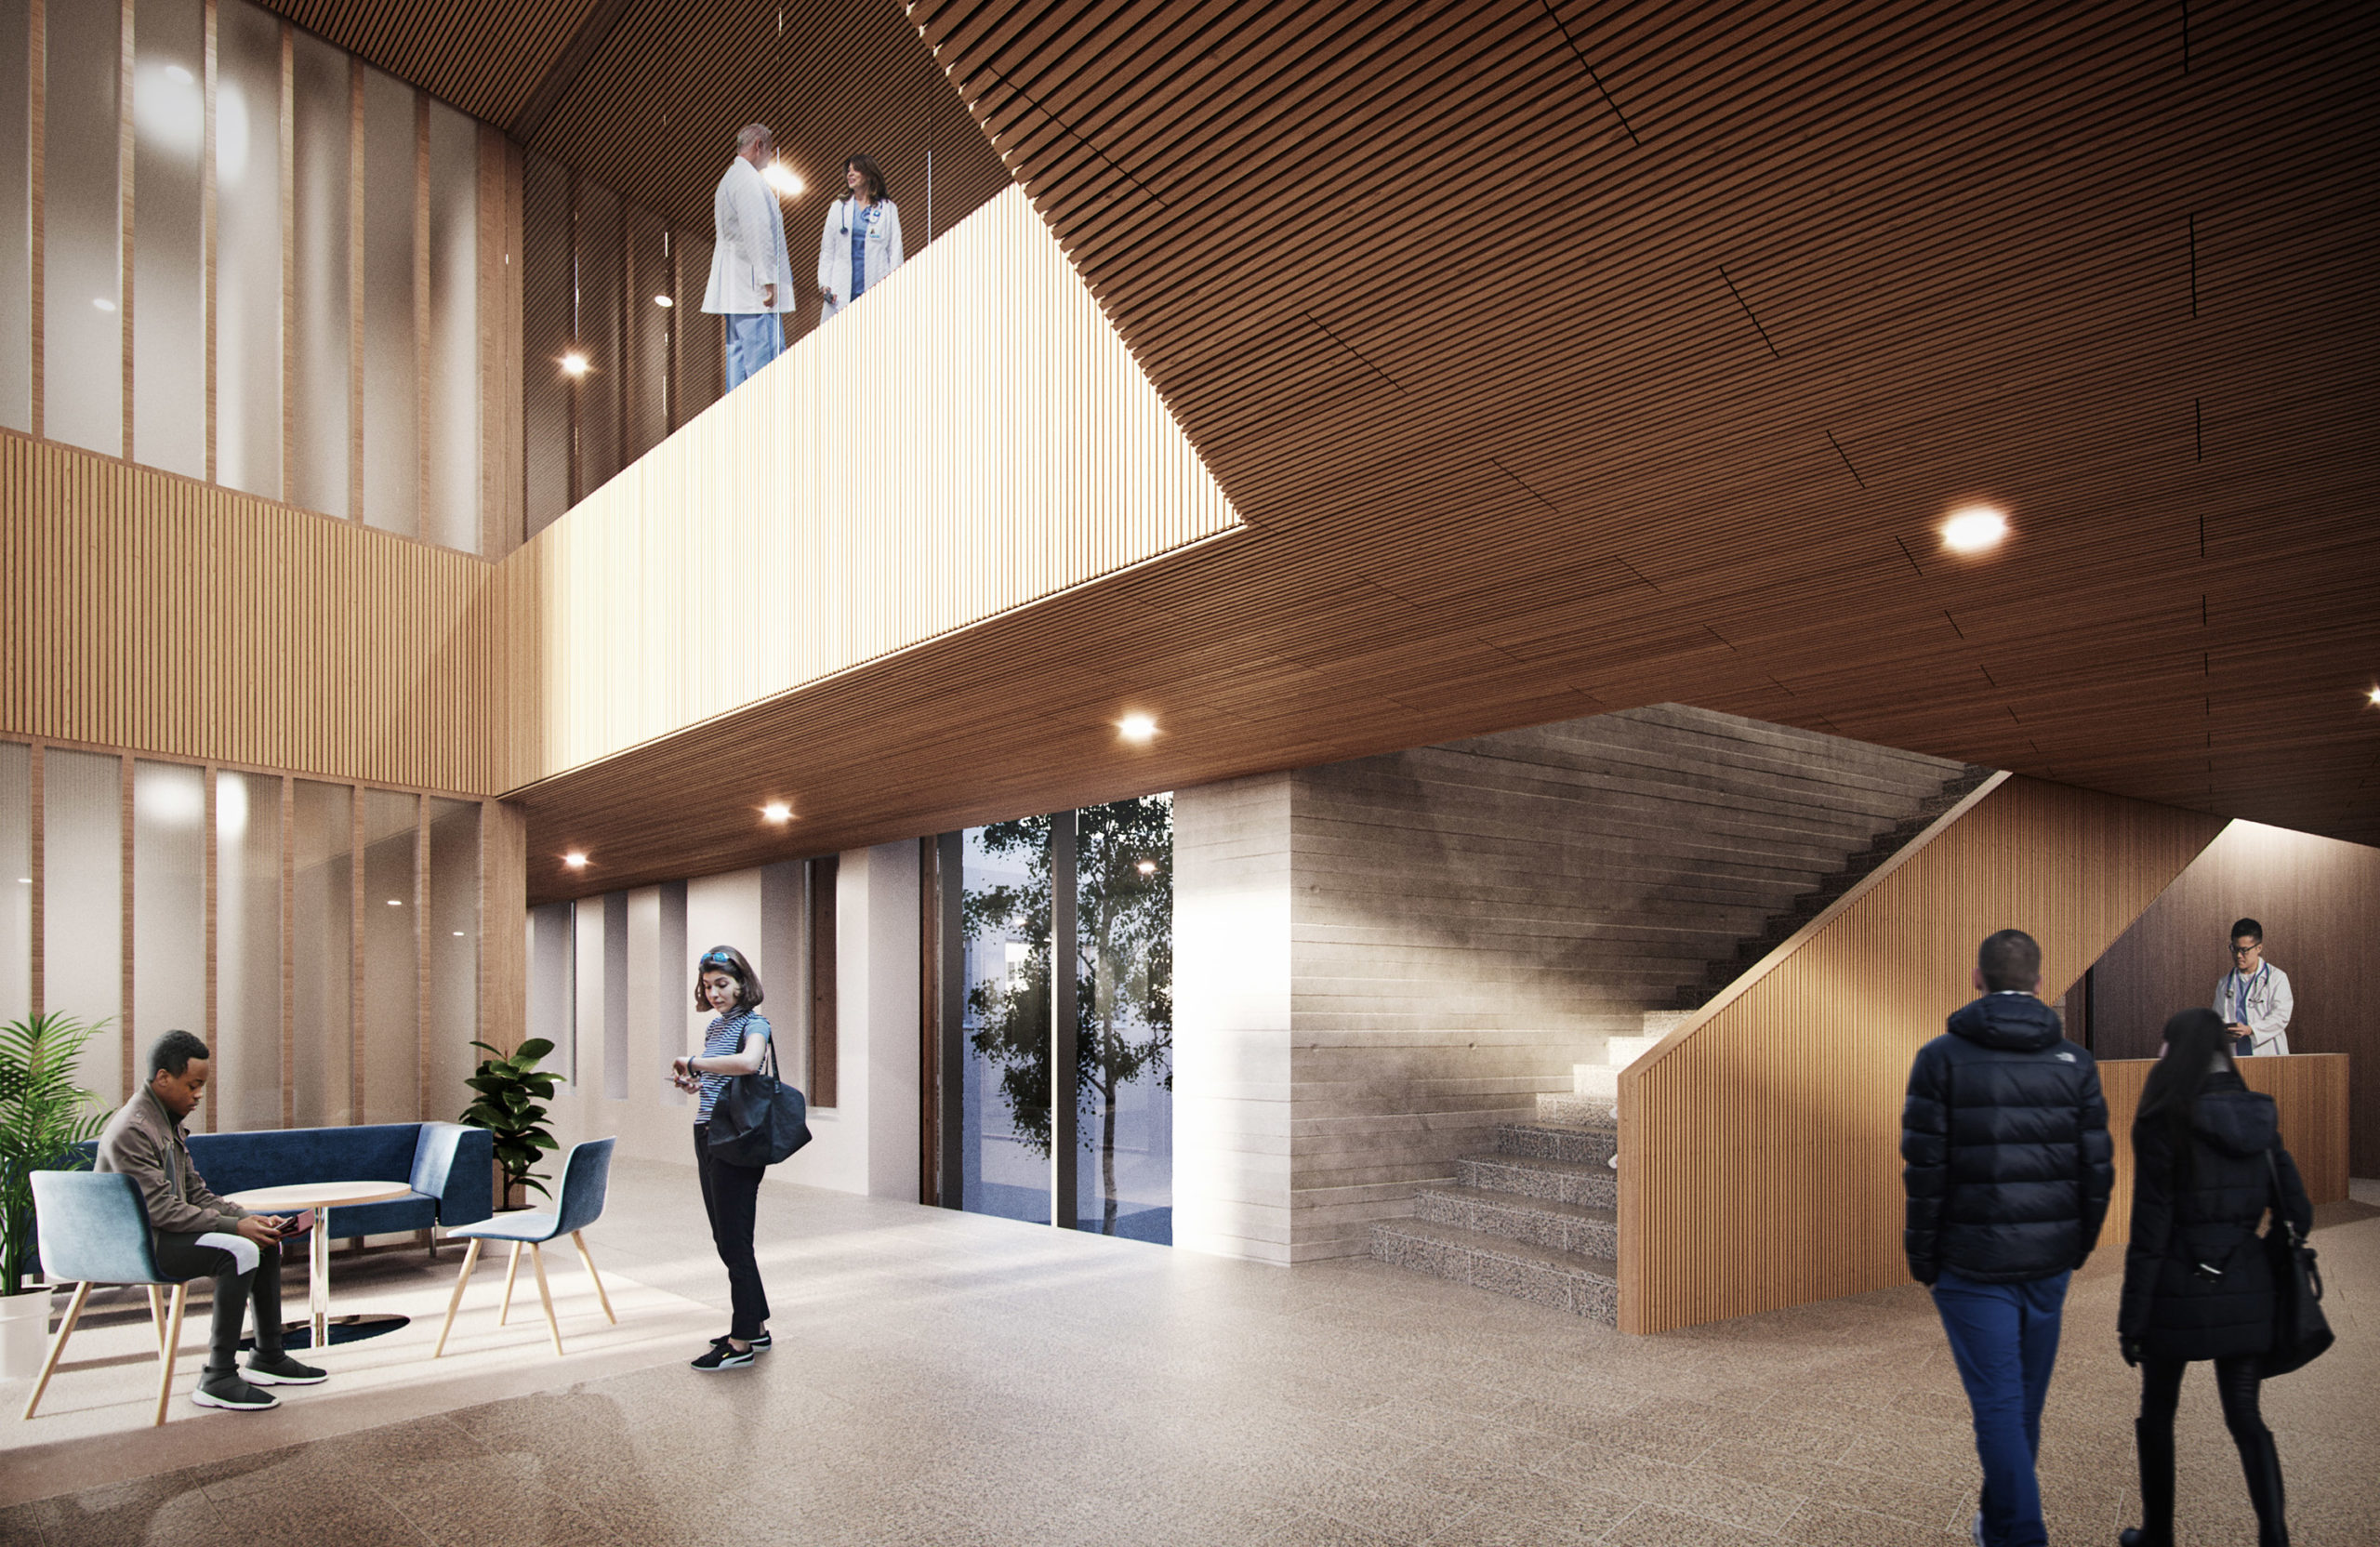 The pshychiatric hospital of the Lapland Central Hospital designed by Verstas Architects